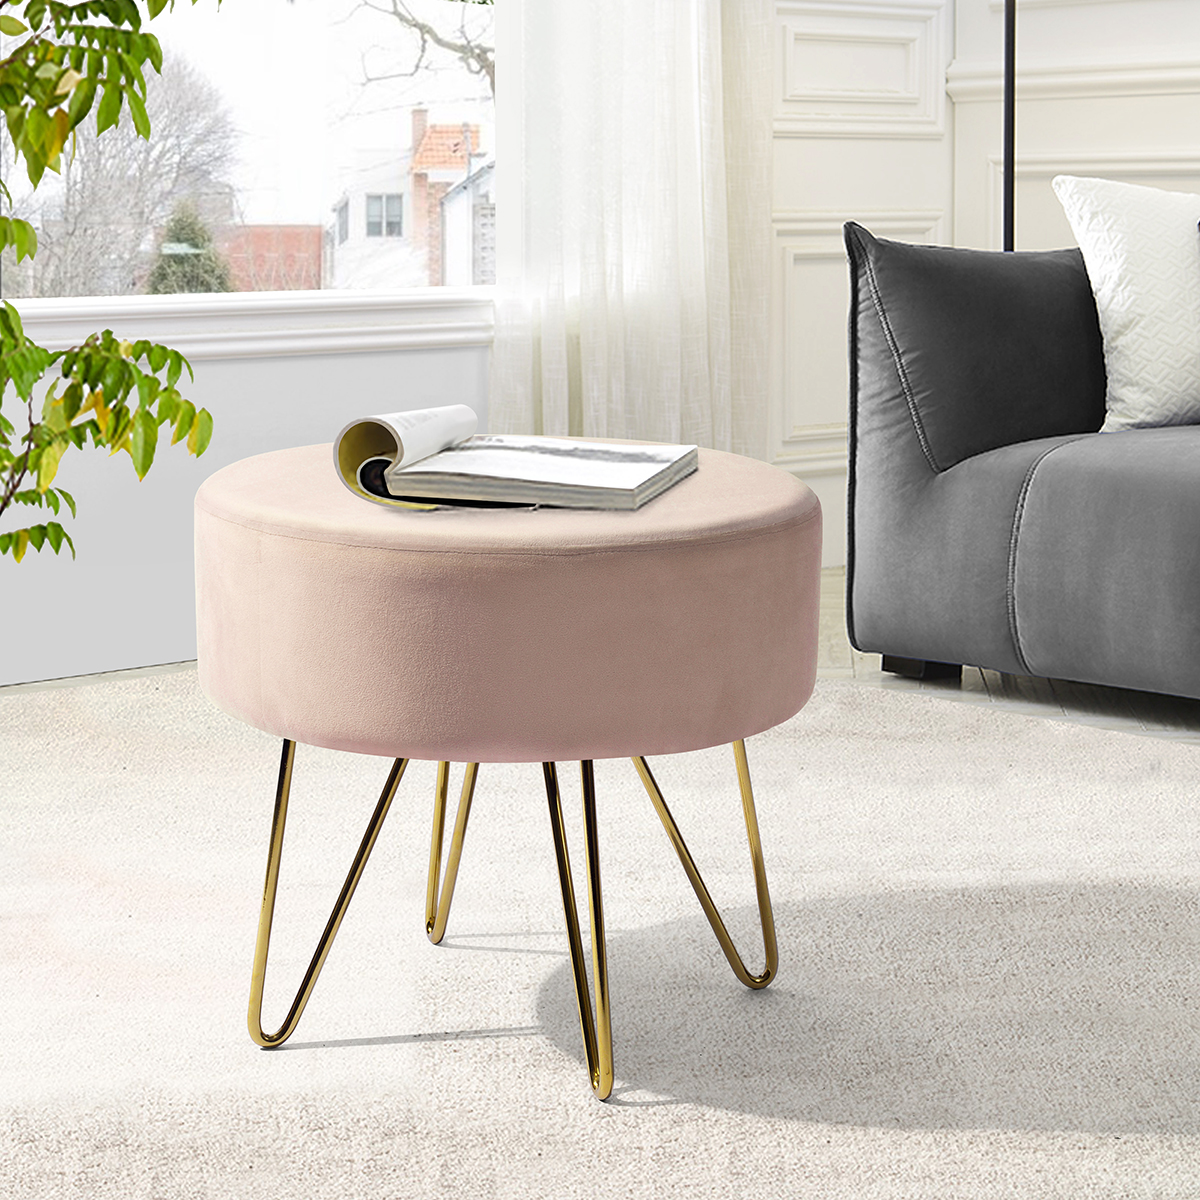 17.7" Decorative Round Shaped Ottoman with Metal Legs - Pink and Gold